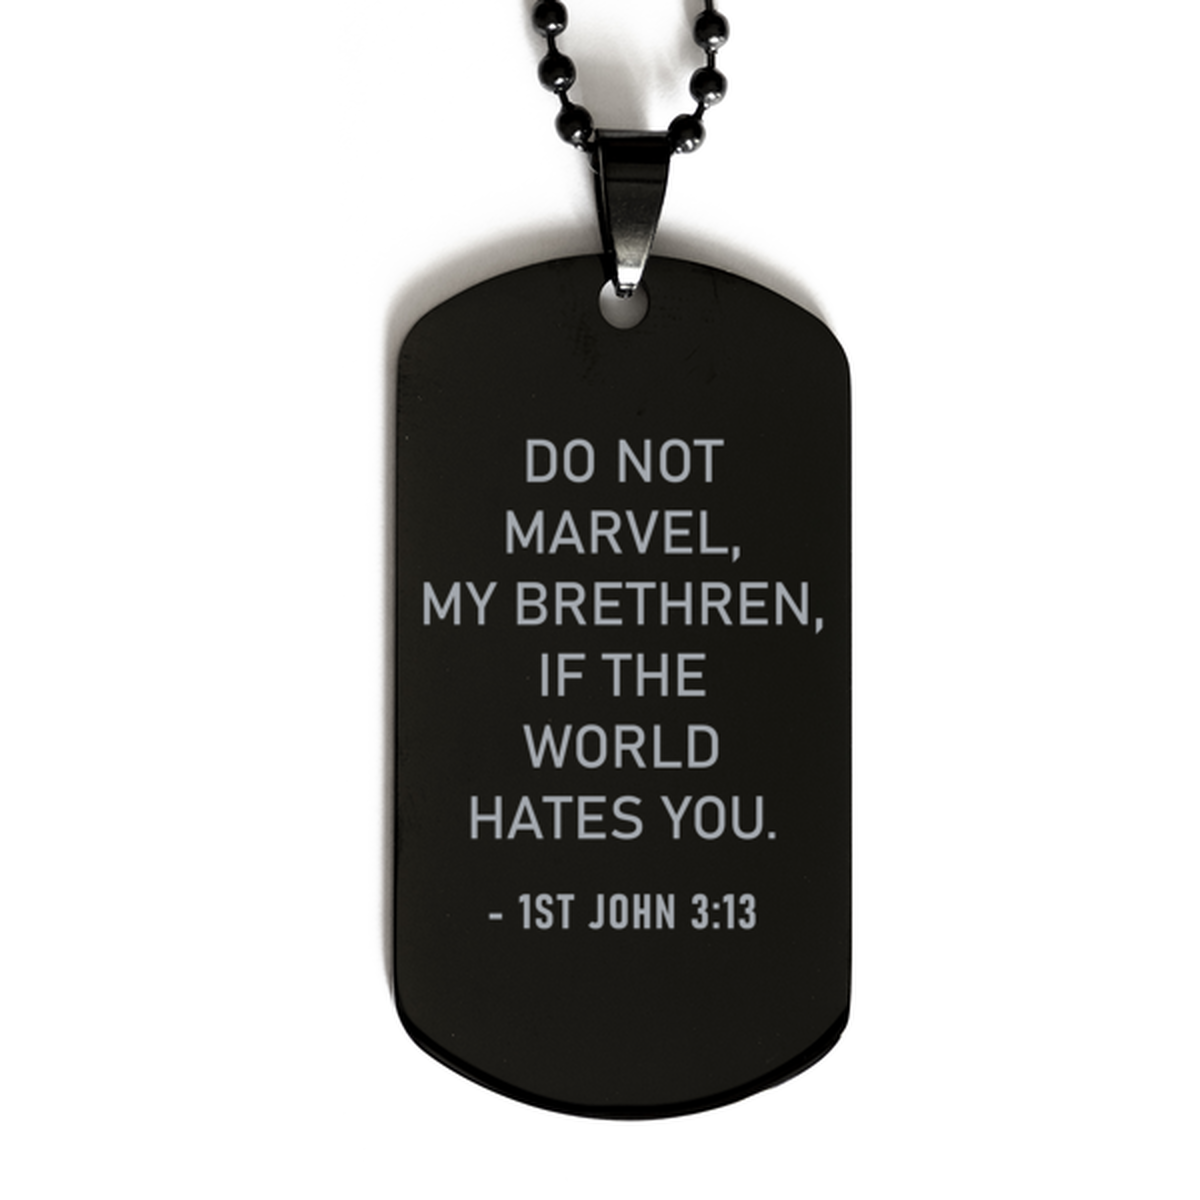 Bible Verse Black Dog Tag, 1St John 3:13 Do Not Marvel, My Brethren If The World Hates, Christian Inspirational Necklace Gifts For Men Women